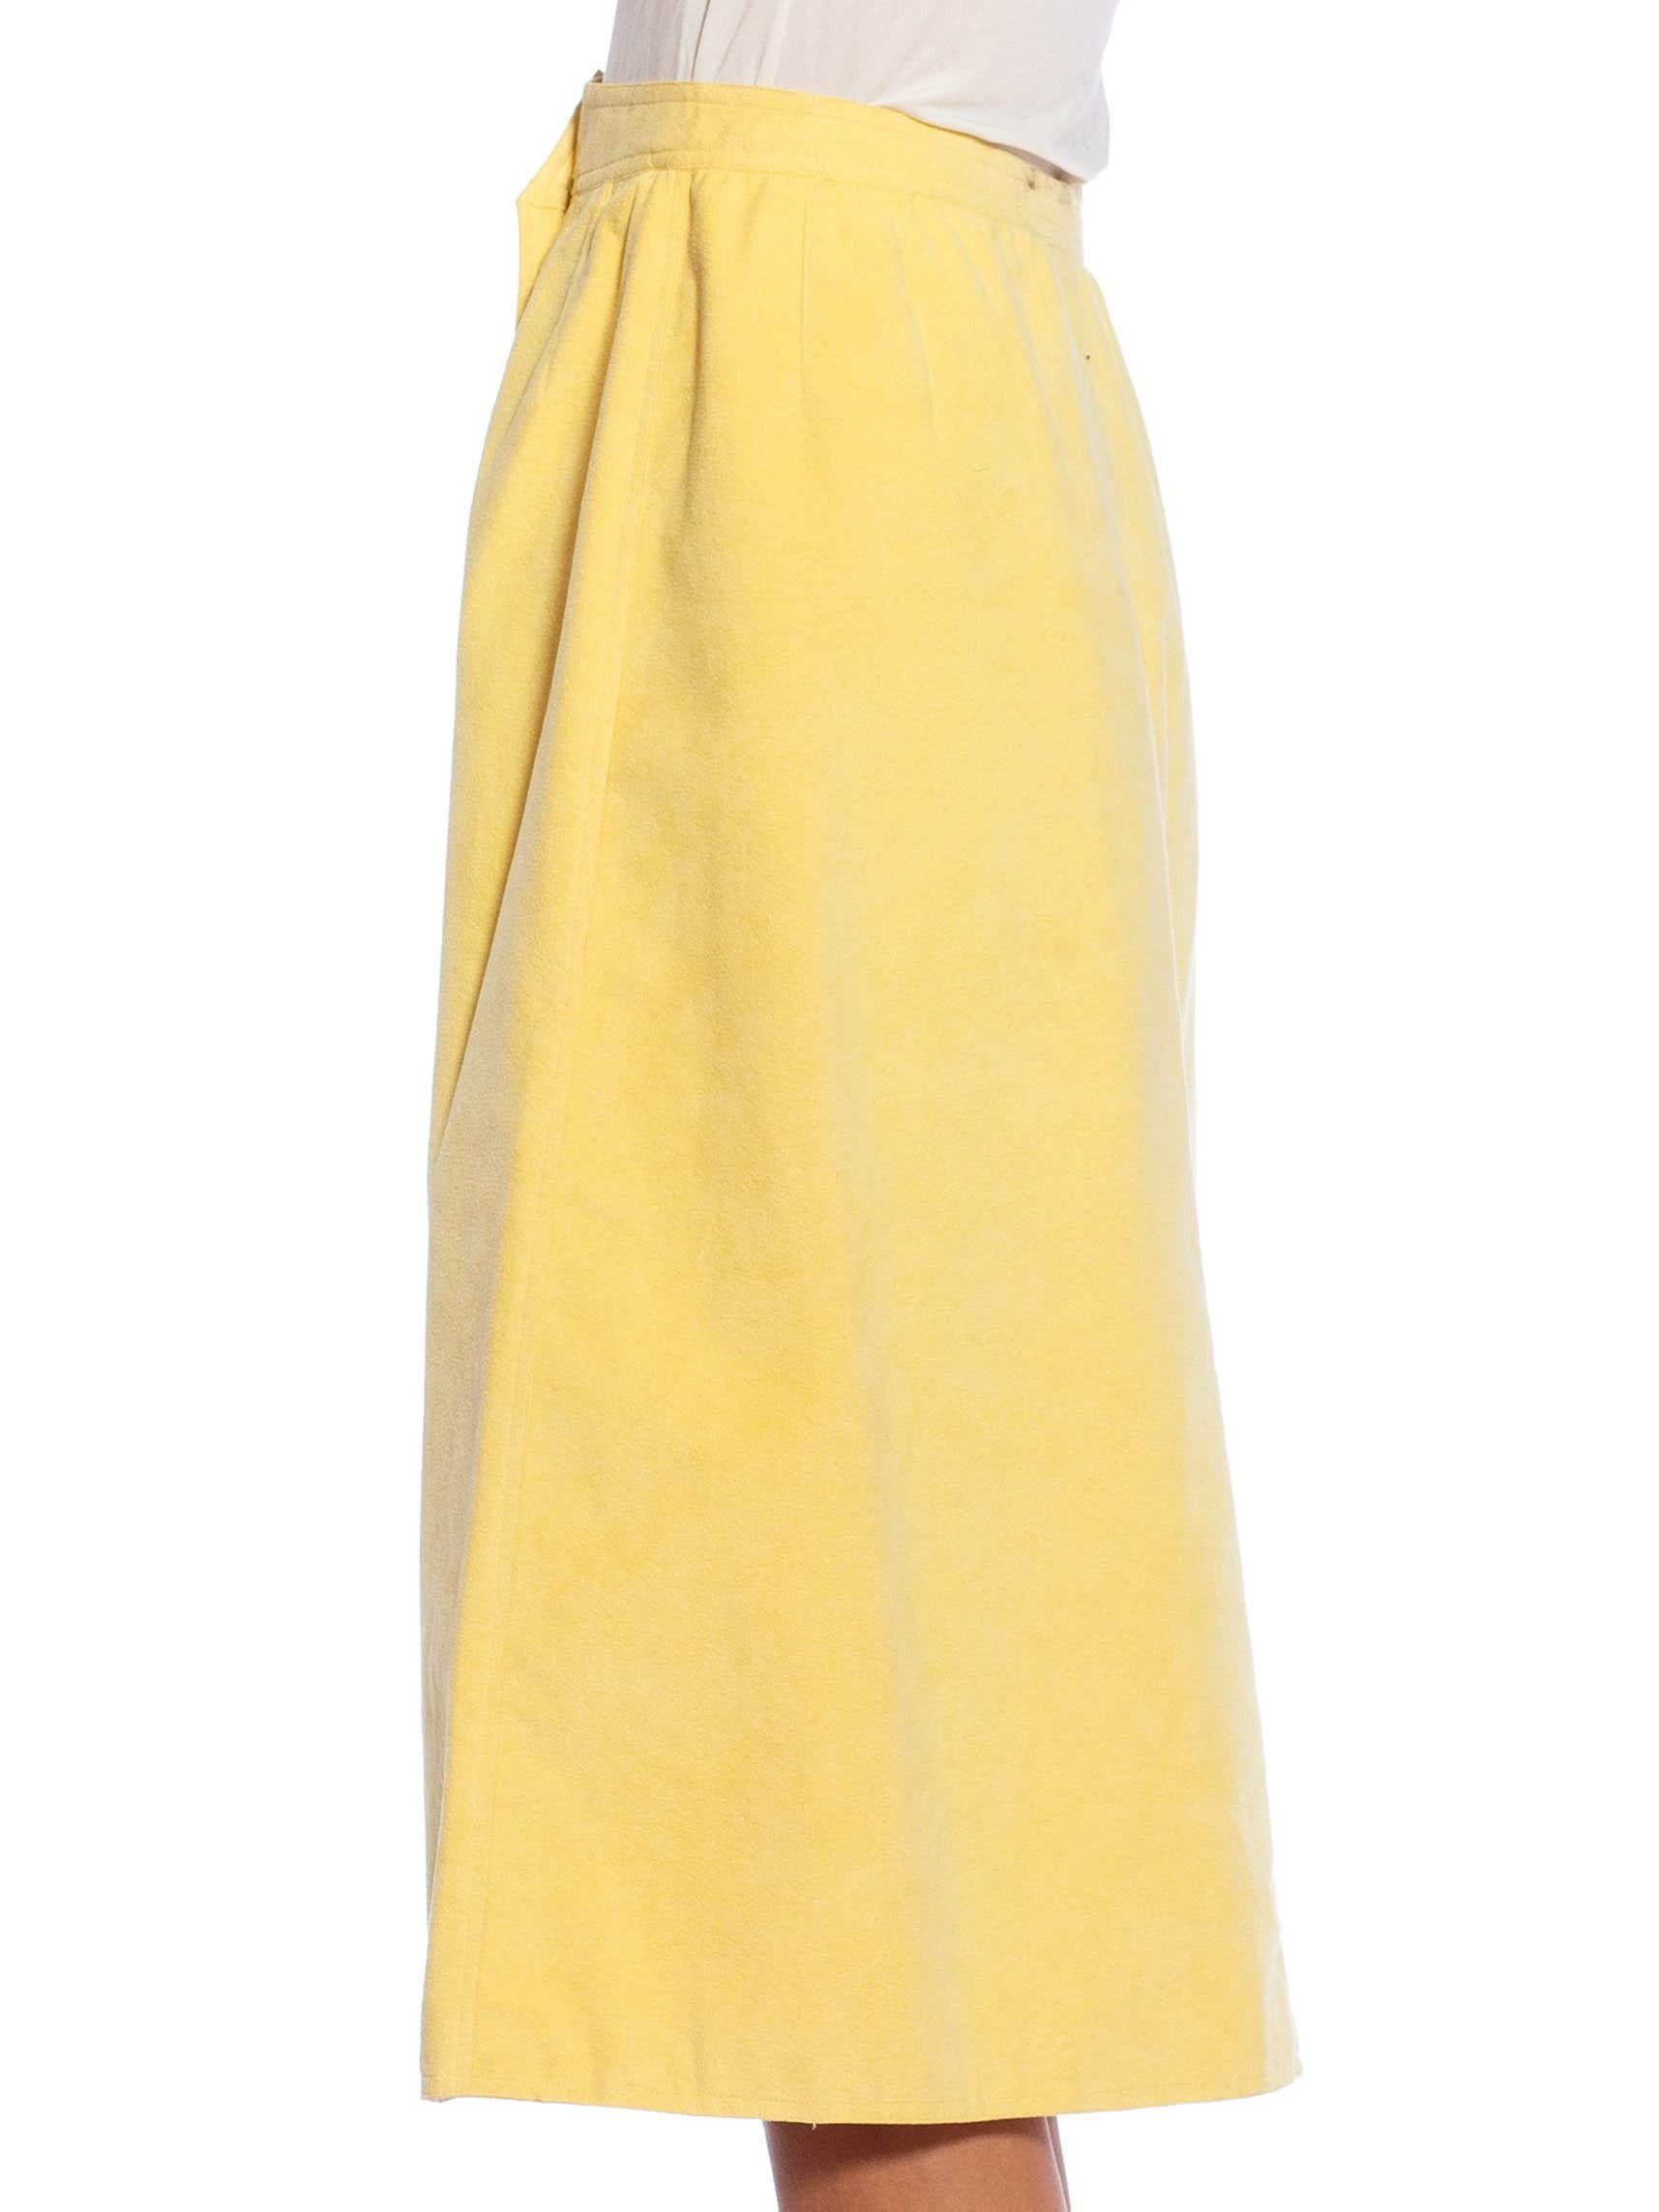 Missing the label so priced as-is 1970S HALSTON Butter Yellow Poly Blend Ultrasuede Skirt With Pockets 